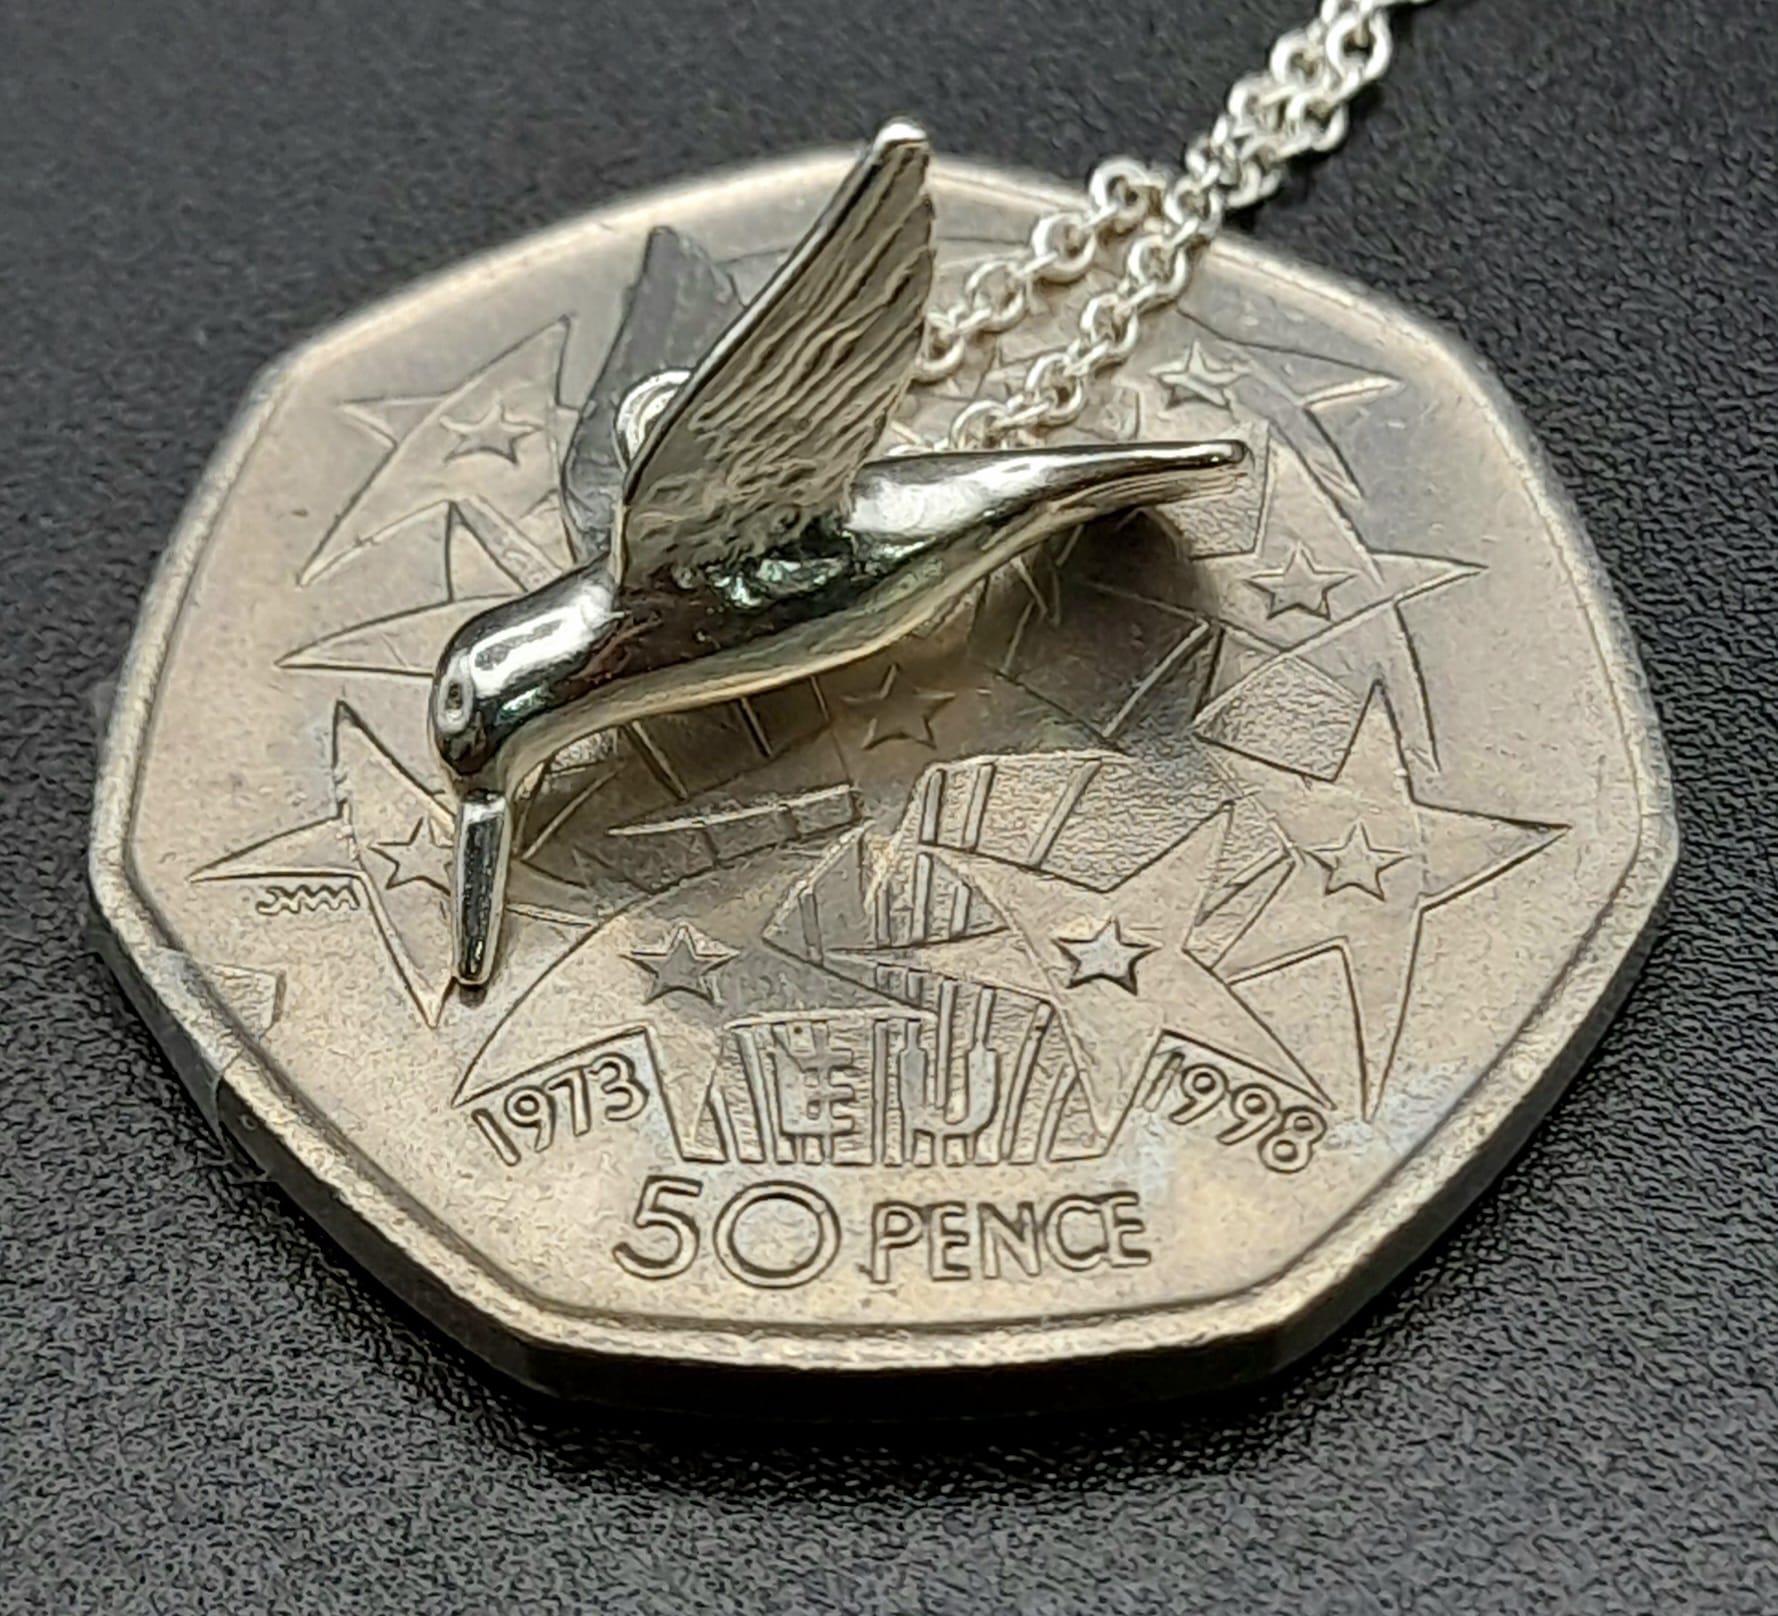 ALEX MONROE STERLING SILVER SWALLOW PENDANT & CHAIN AS NEW WEIGHS 3.47G - Image 7 of 7